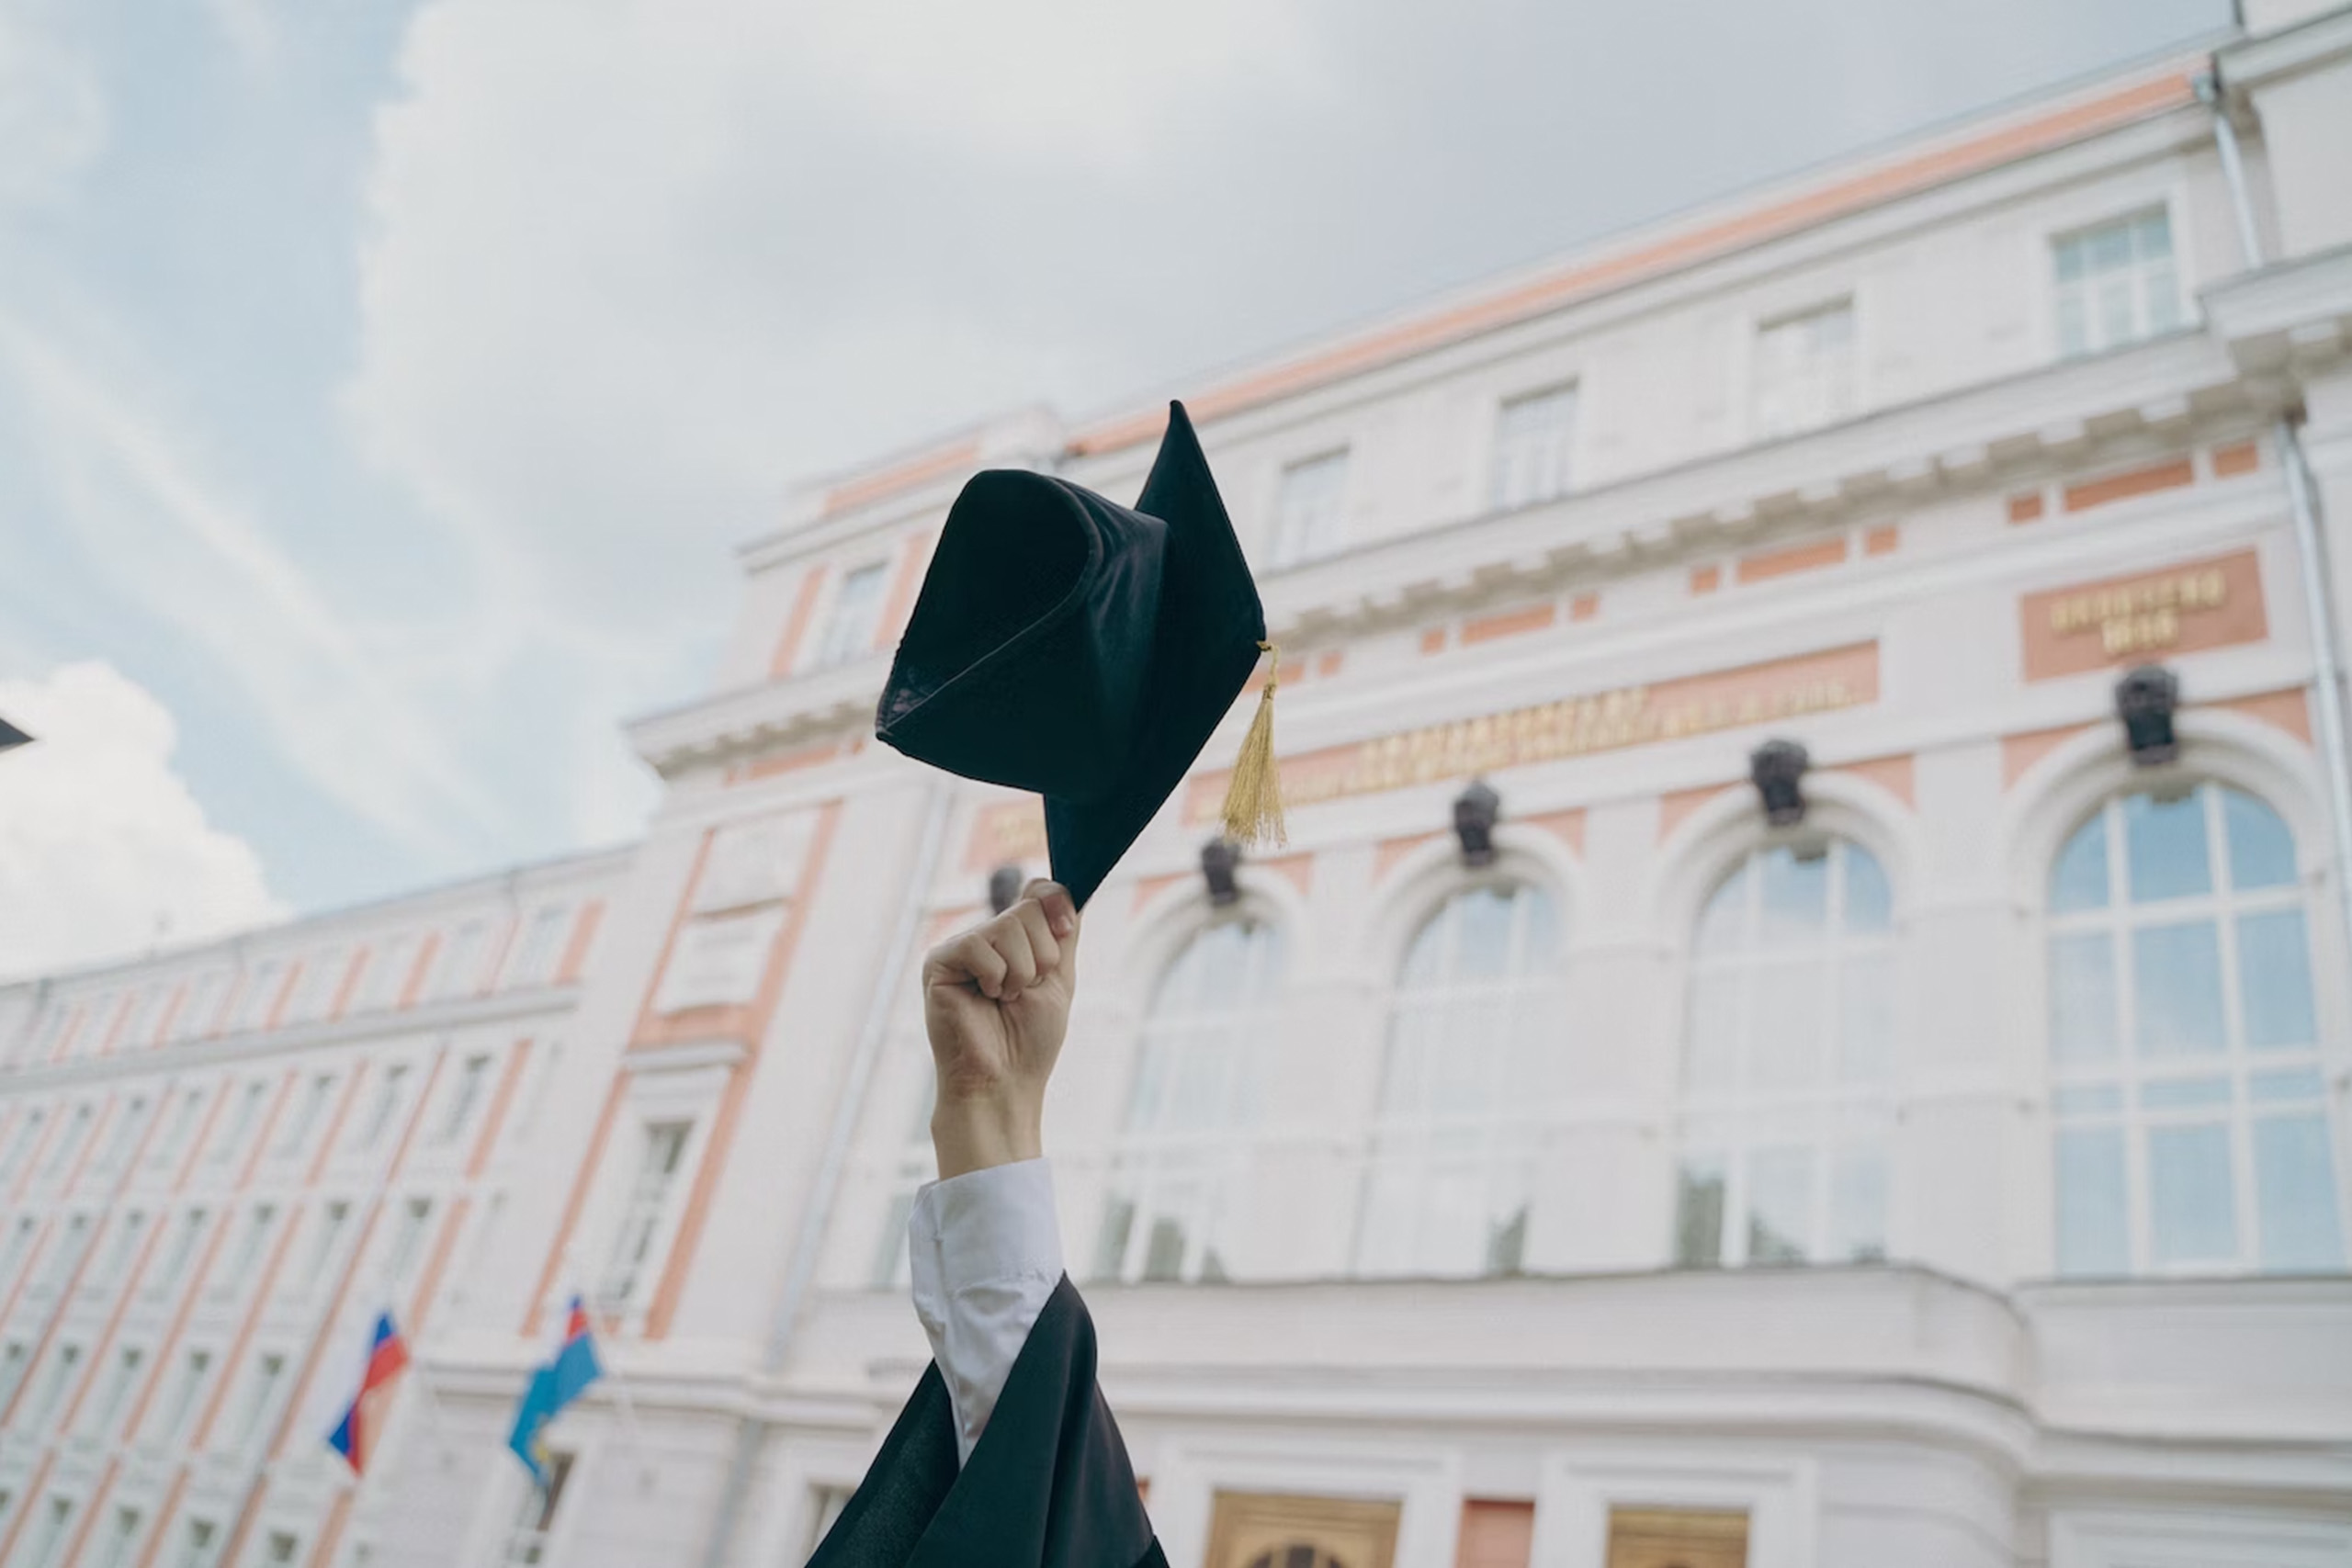 A recently graduated student holds up their graduation cap in front of a school building.